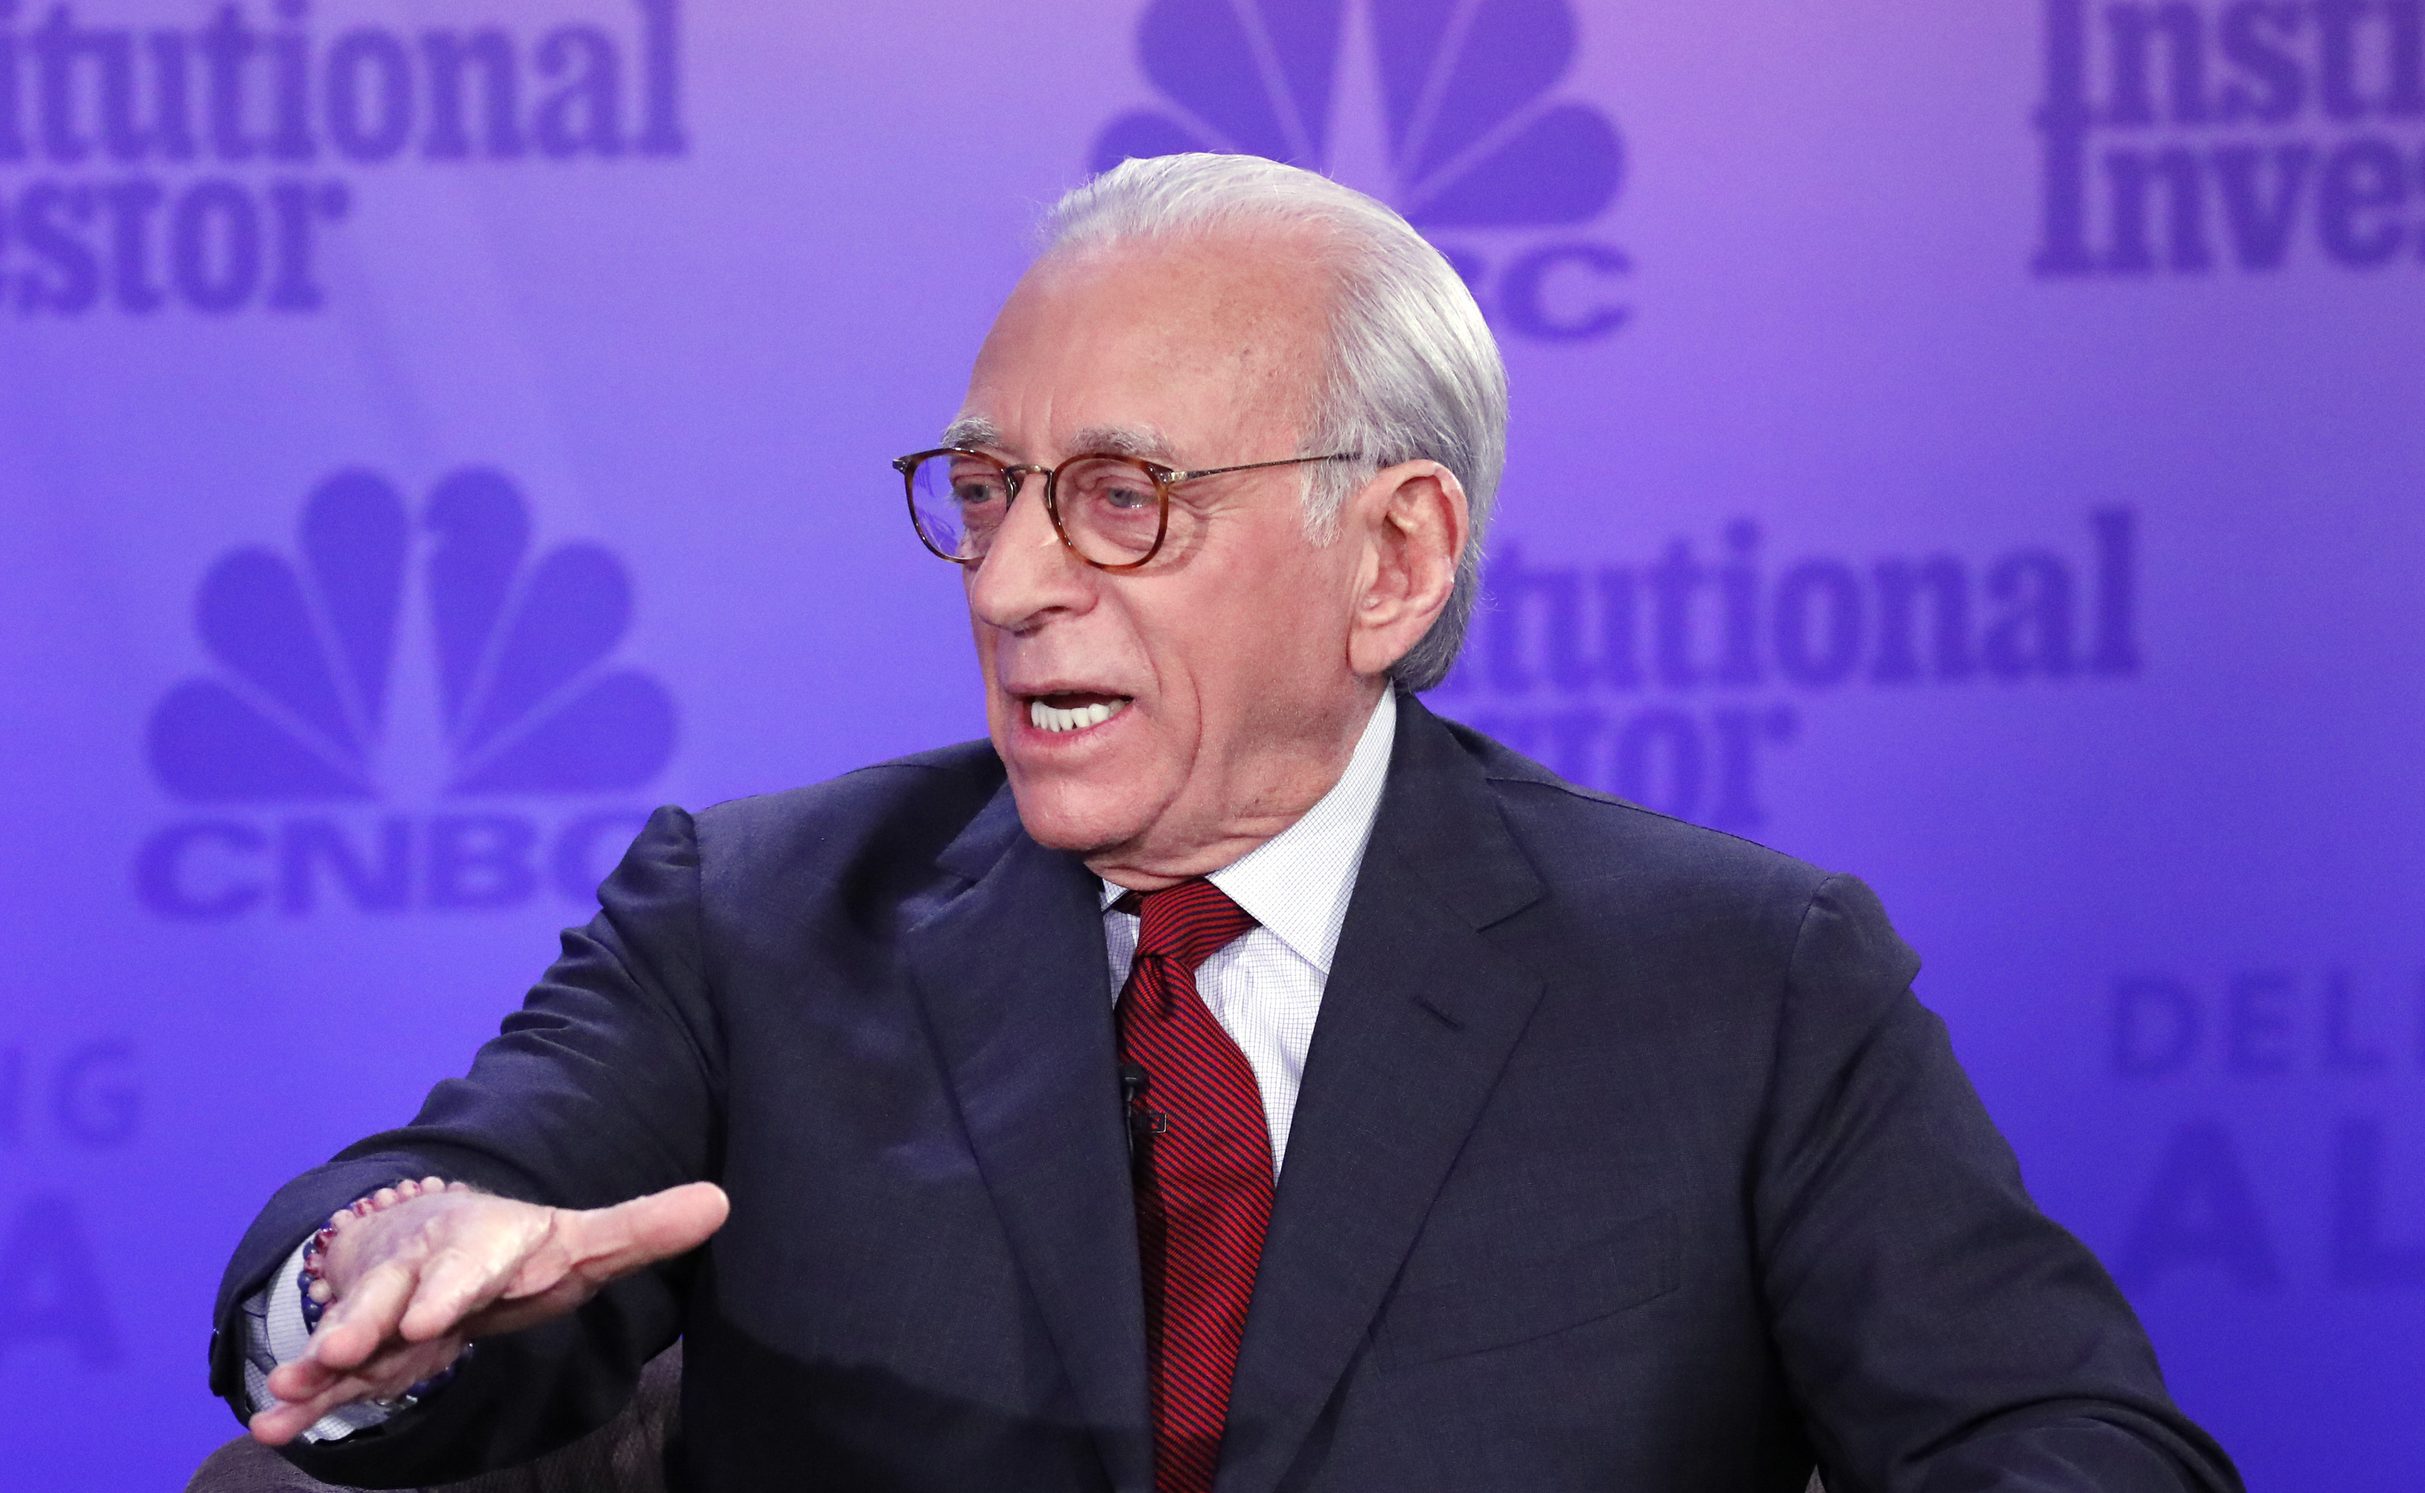 nelson peltz officially launches disney proxy fight, aiming to push company to hit ‘netflix-like' streaming margins. but can he get the votes to win?